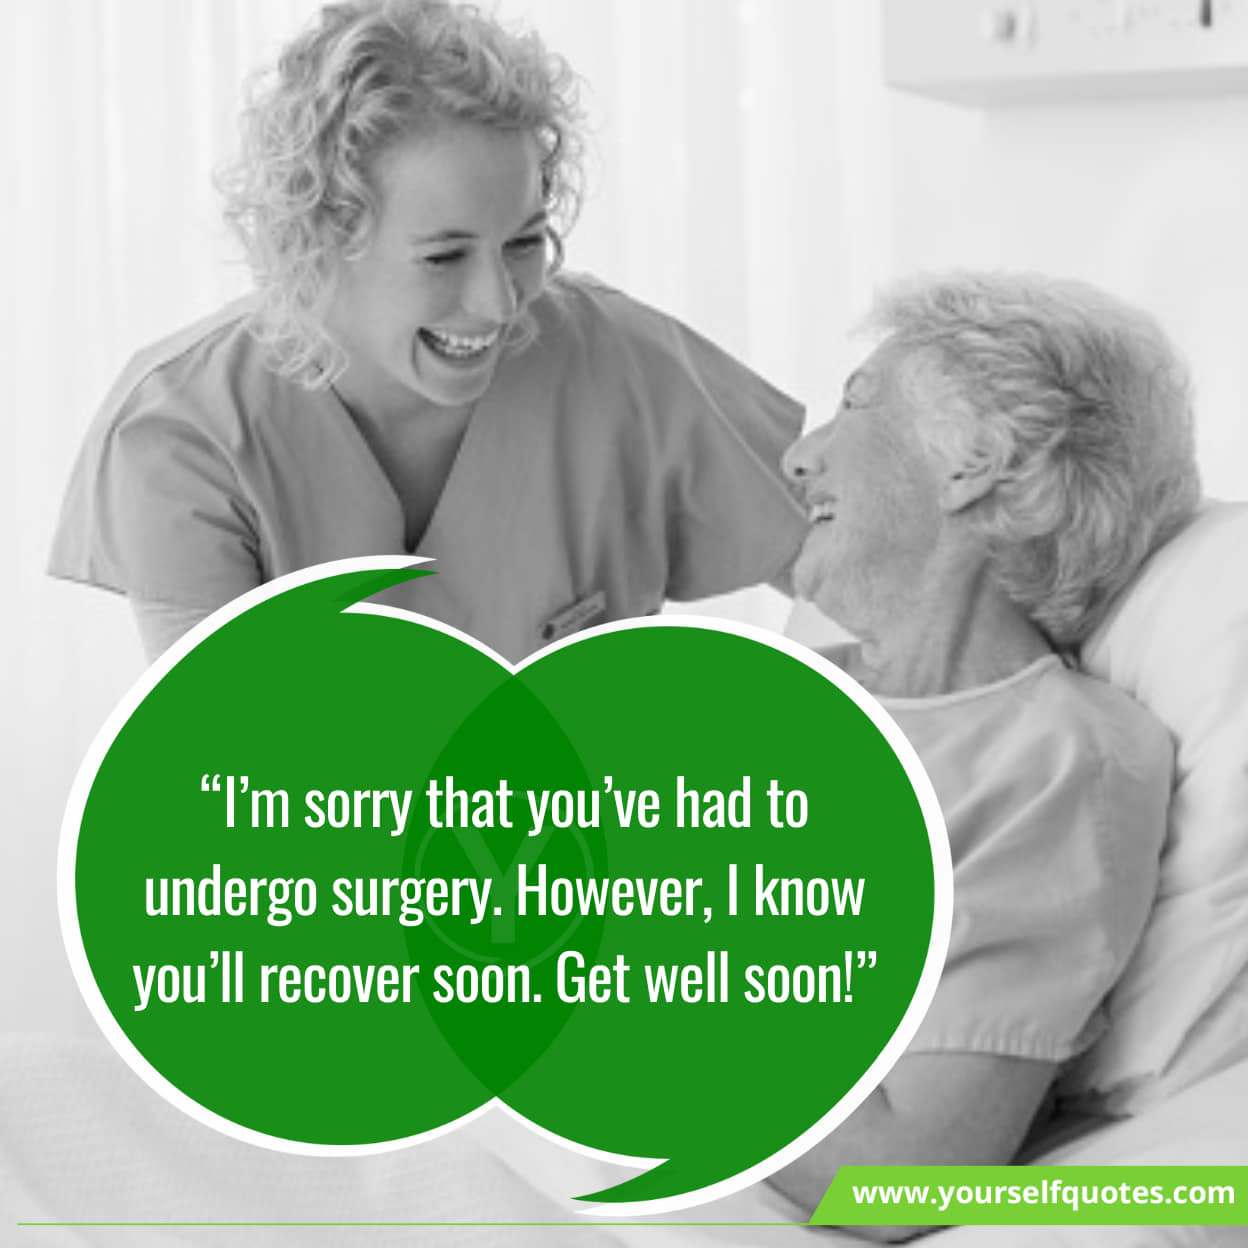 Heart-Warming Quotes Sayings For Speedy Recovery